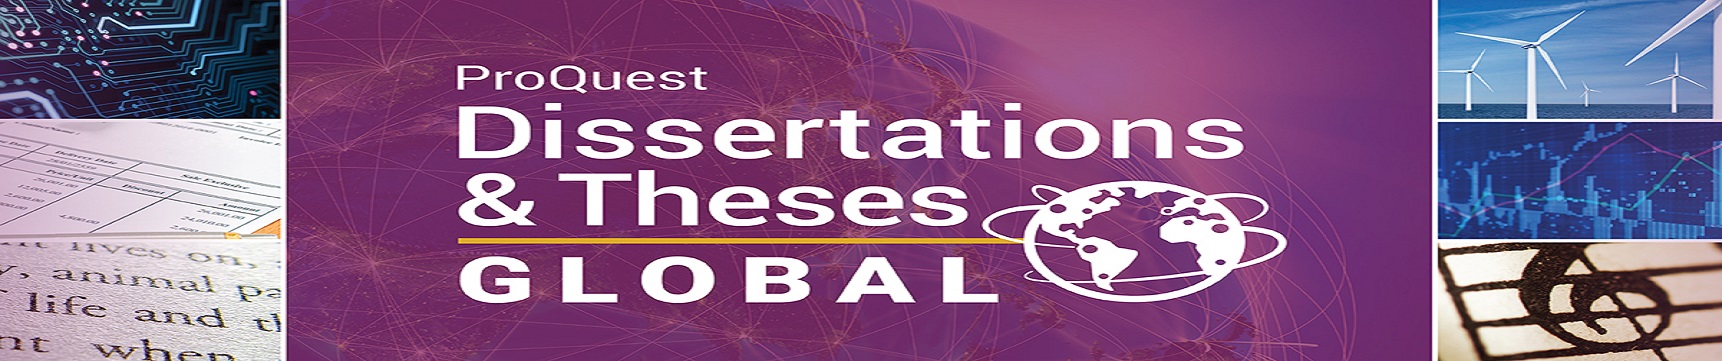 ProQuest Dissertations & Theses Global (PQDT)